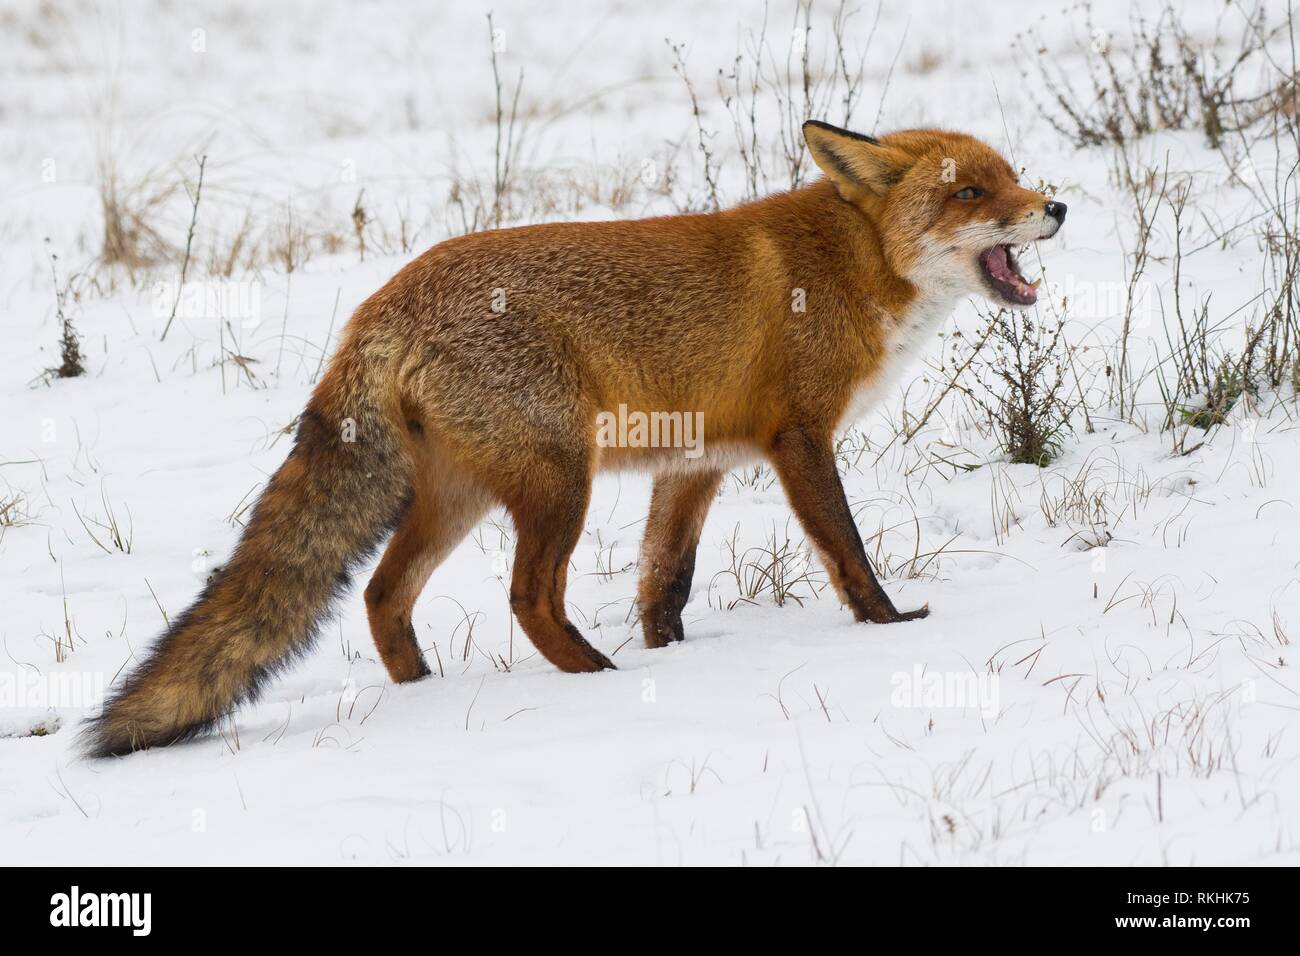 Red fox (Vulpes vulpes) in the snow, open mouth, North Holland, Netherlands Stock Photo